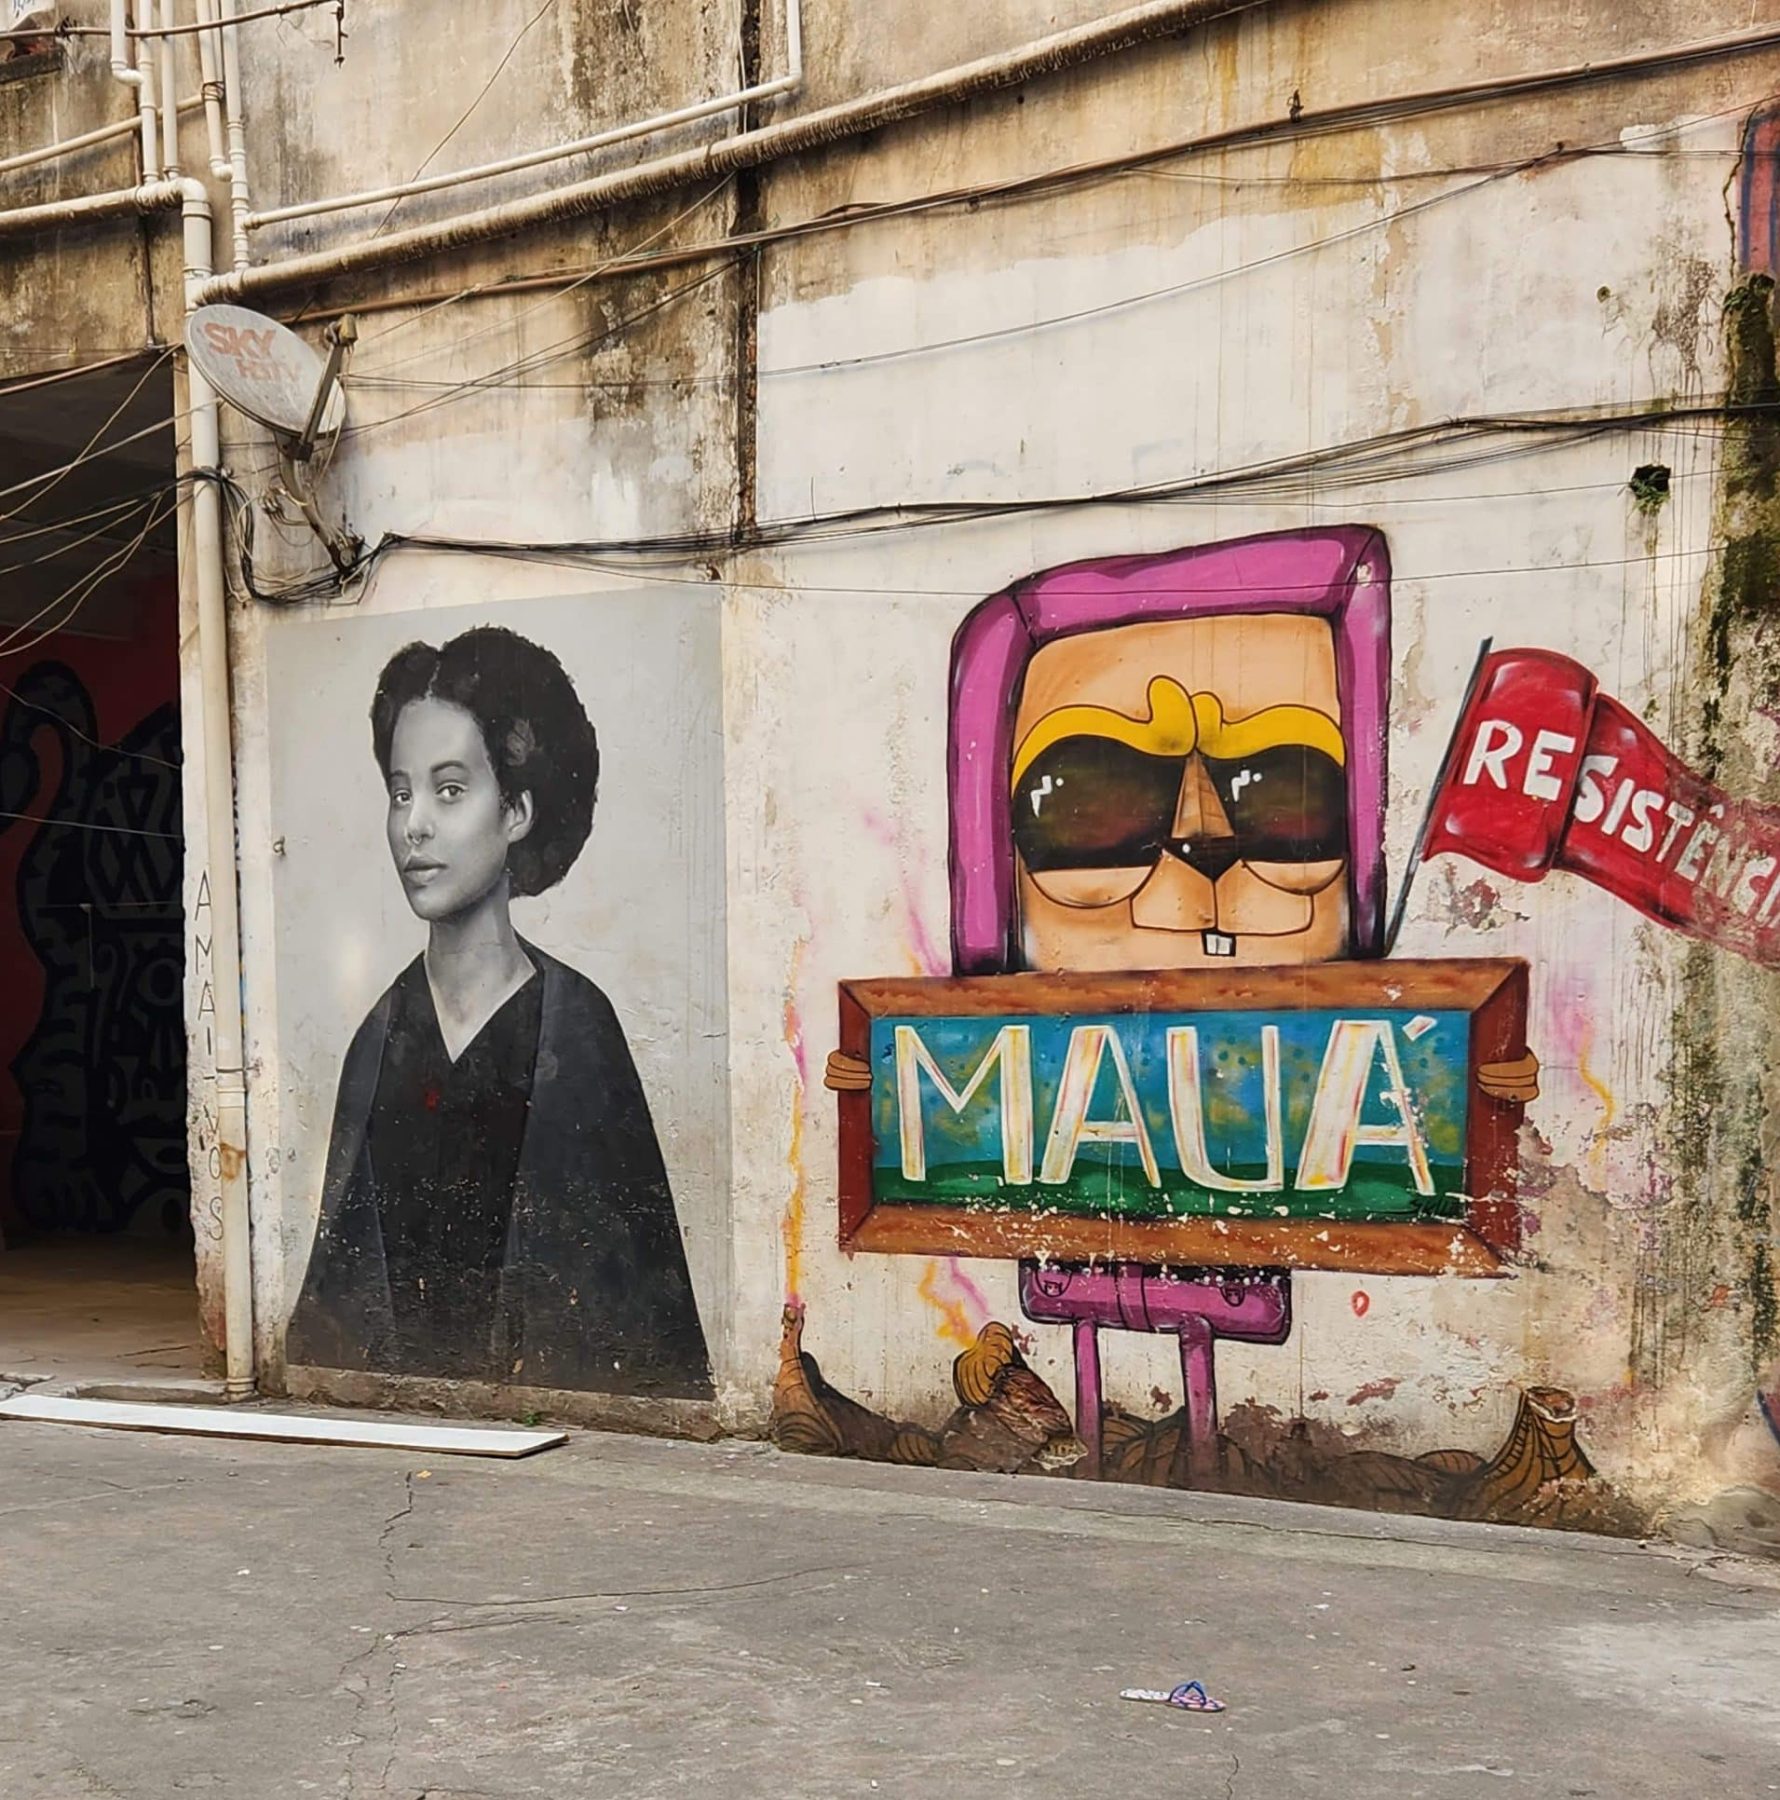 A small black and white mural of a woman in robes, next to a small mural of a cartoon animal holding a sign that says "Mauá" and a flag that says "resistência"